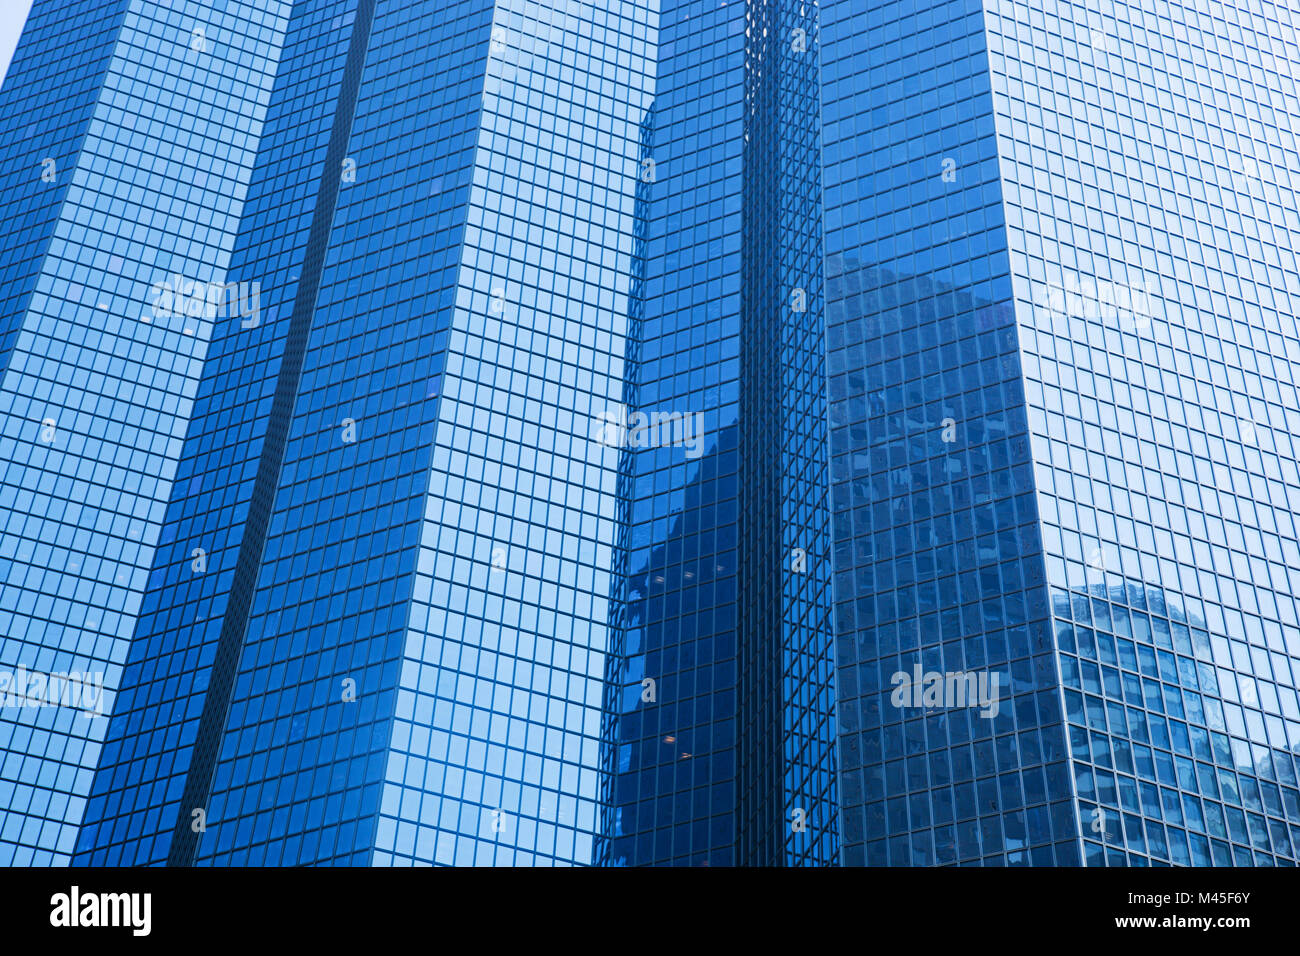 Business skyscrapers modern architecture in blue tint. Stock Photo